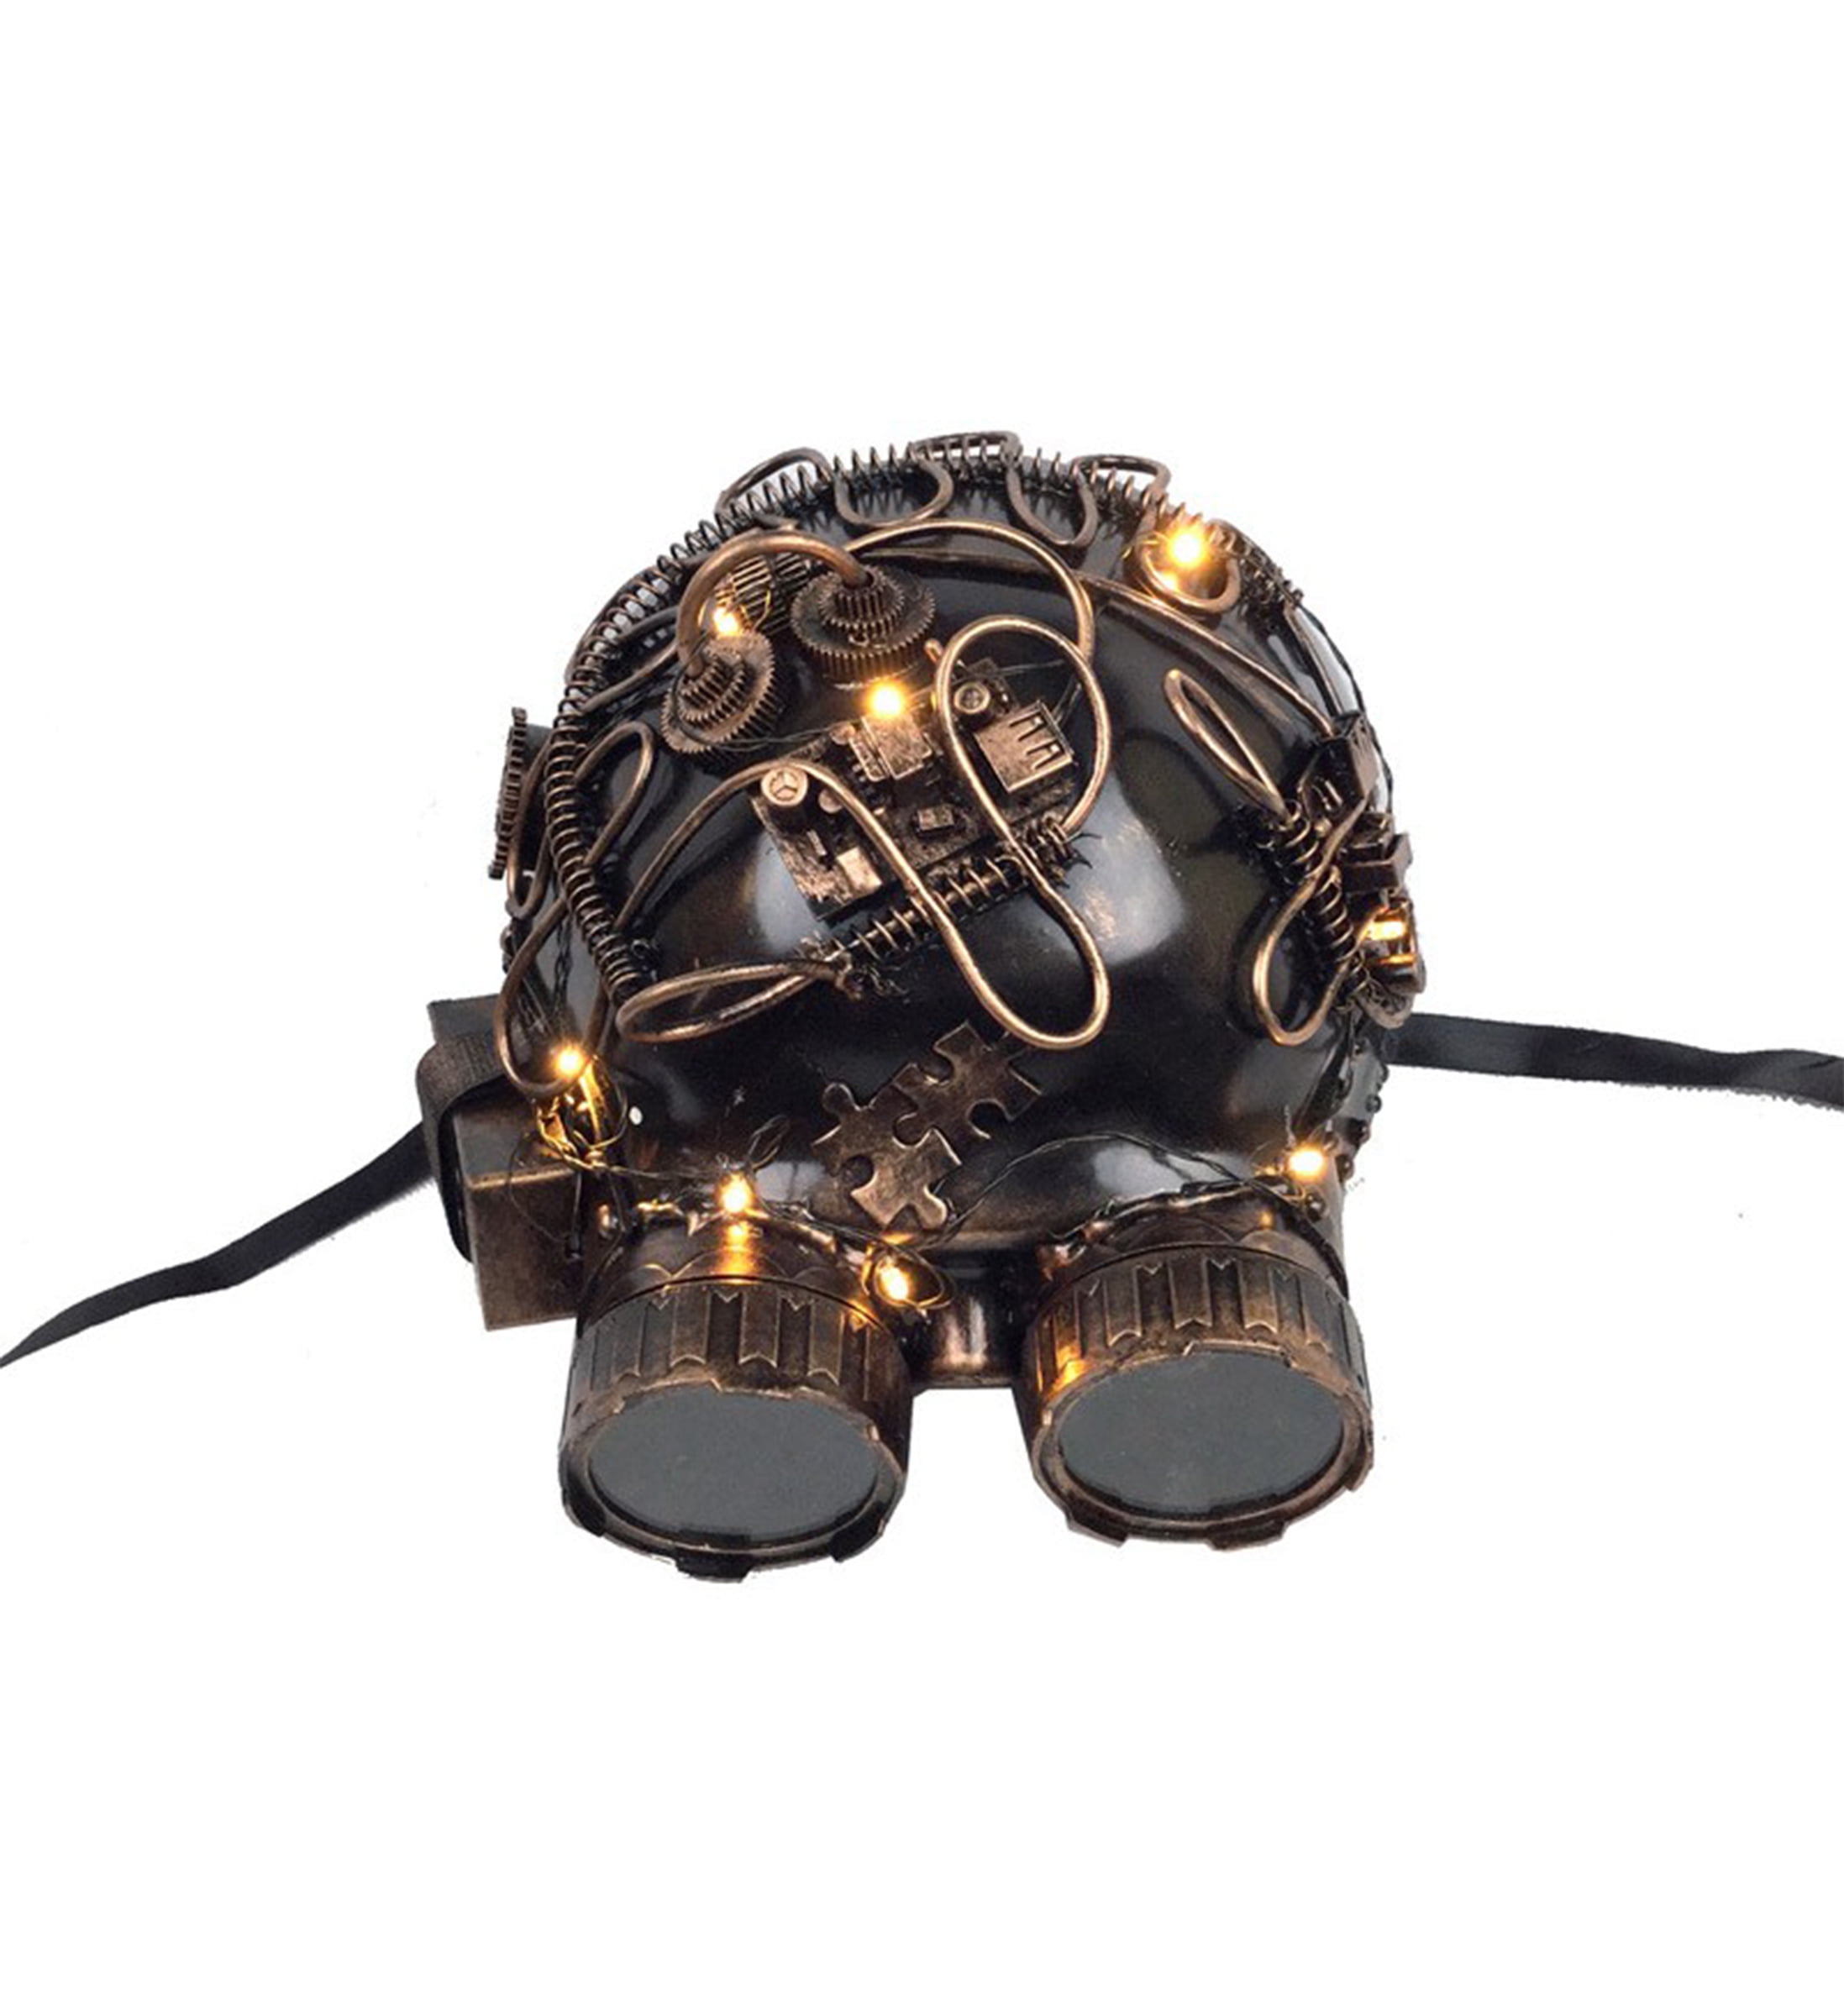 Steampunk Mechanical TOP Hat Burning man Cosplay Costume Halloween Party lightup 